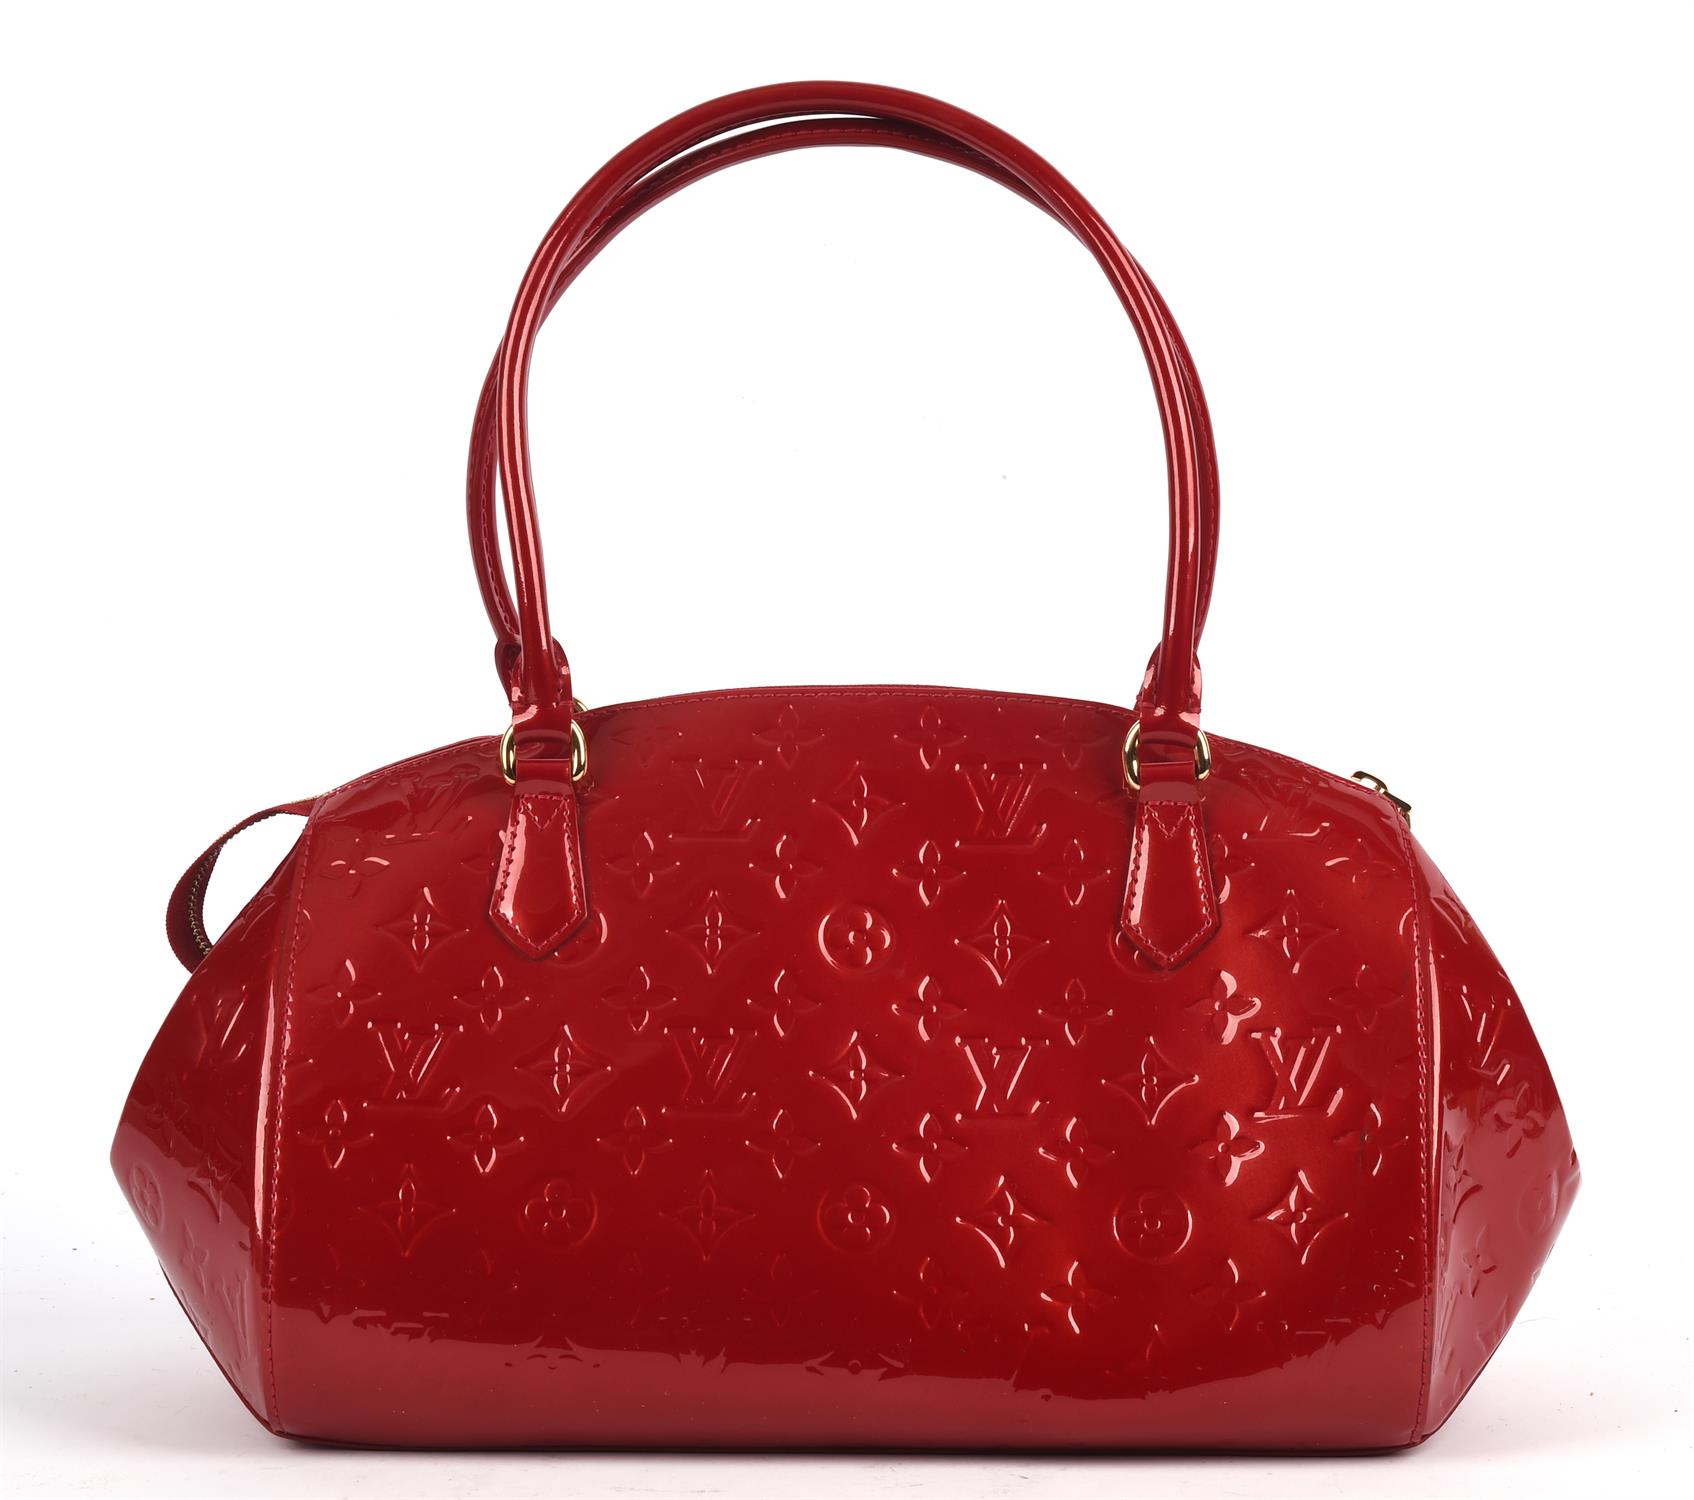 LOUIS VUITTON lipstick red Vernis varnished leather French Montana handbag with gold coloured - Image 6 of 8